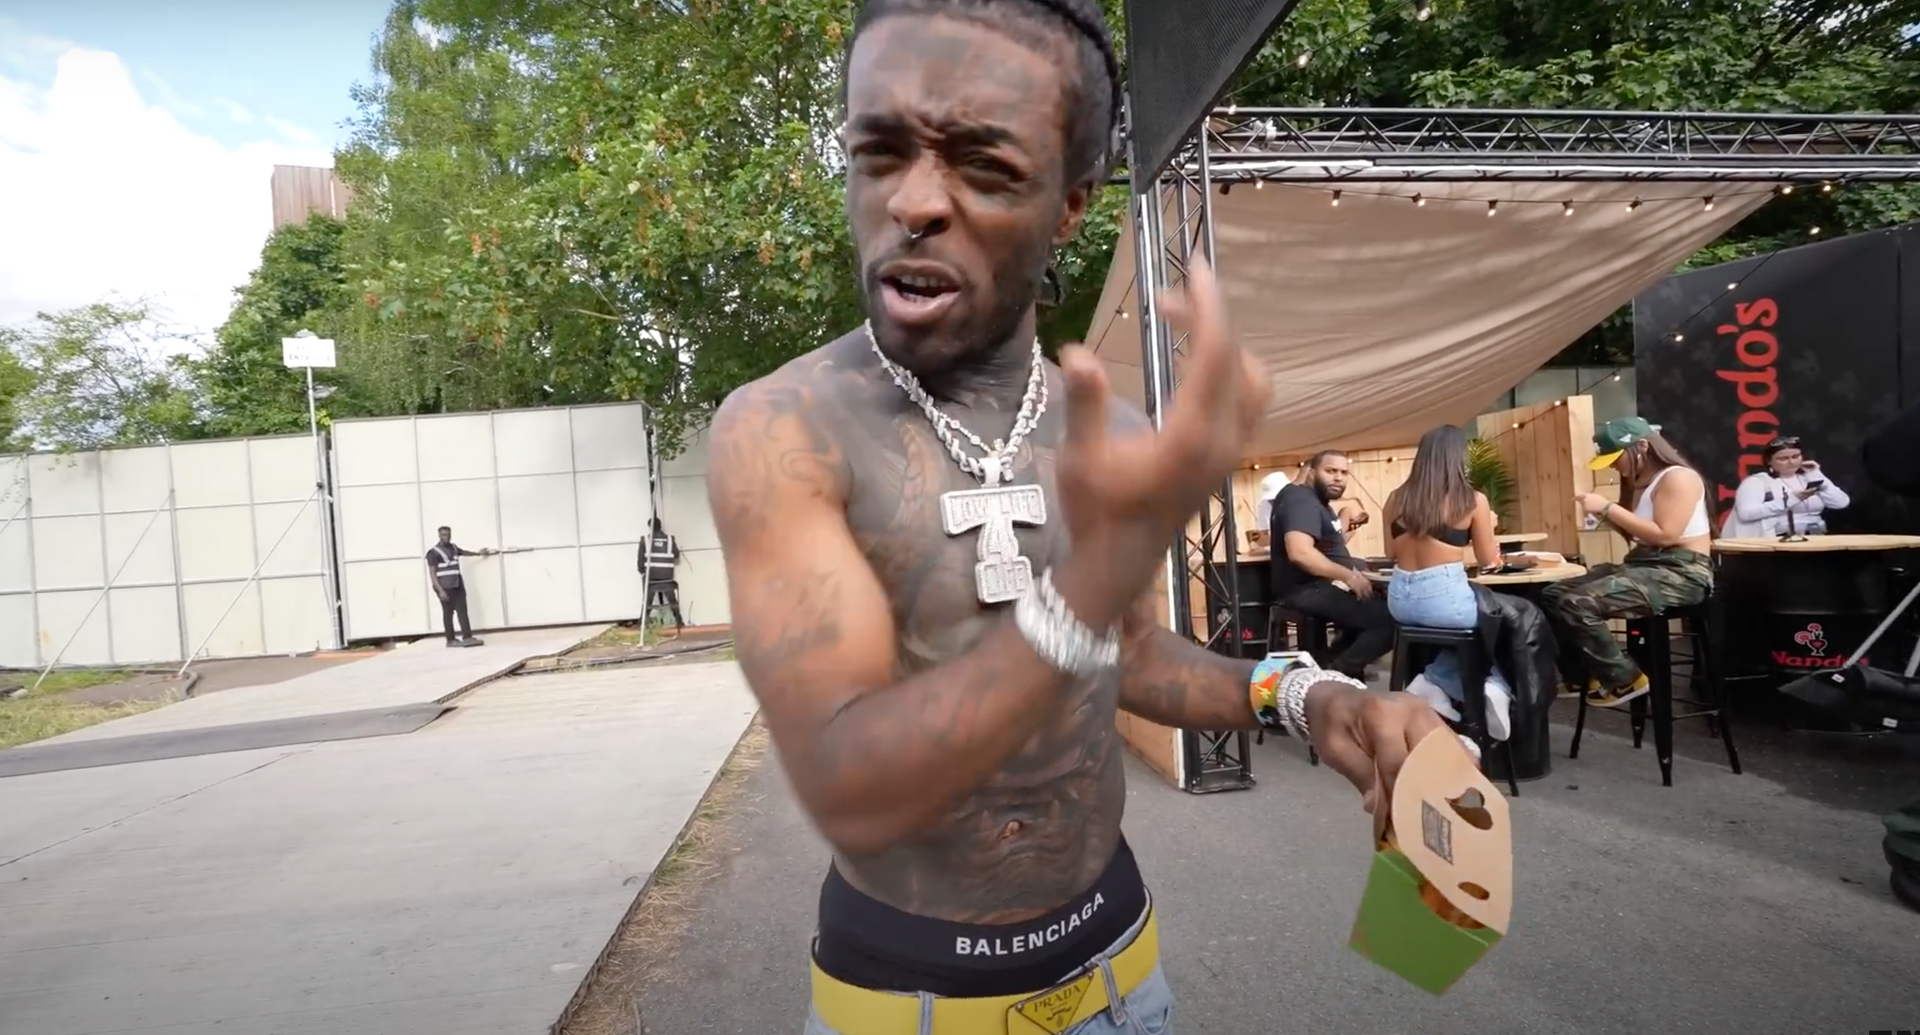 Load video: Icykof - What are people wearing to wireless festival